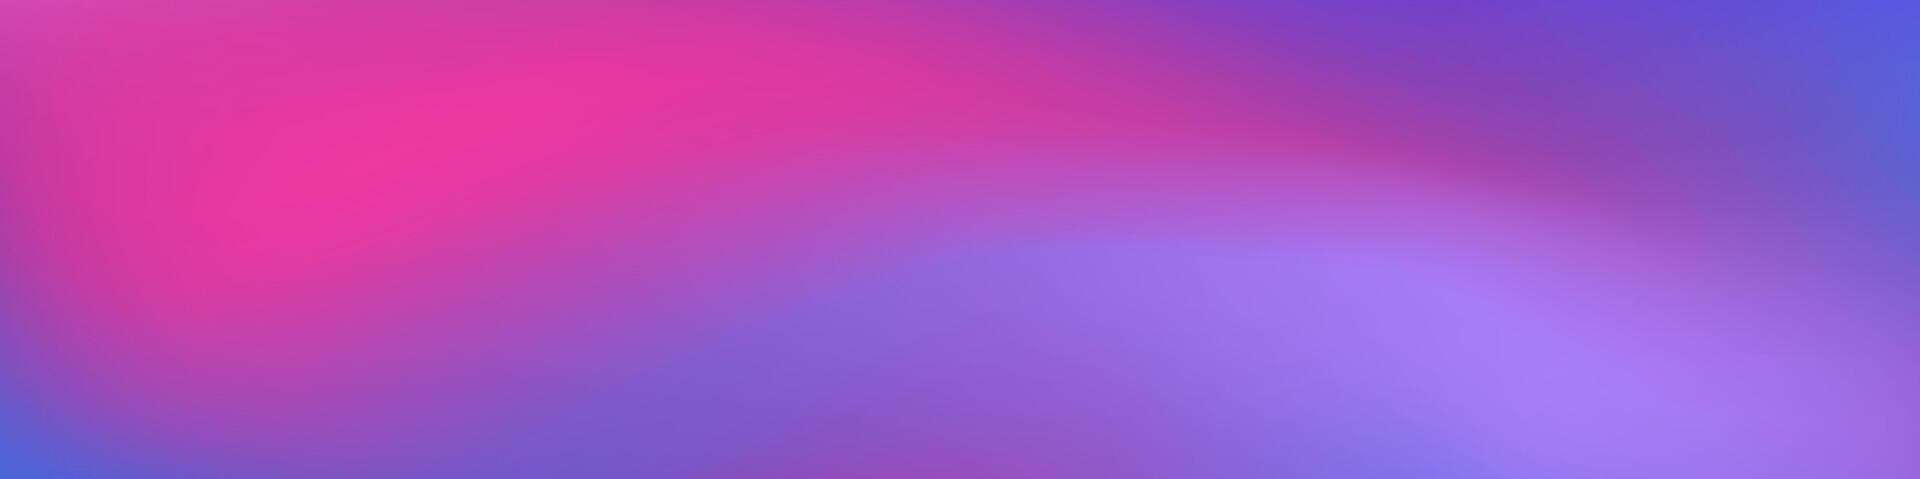 Abstract Background purple blue color with Blurred Image is a  visually appealing design asset for use in advertisements, websites, or social media posts to add a modern touch to the visuals. vector